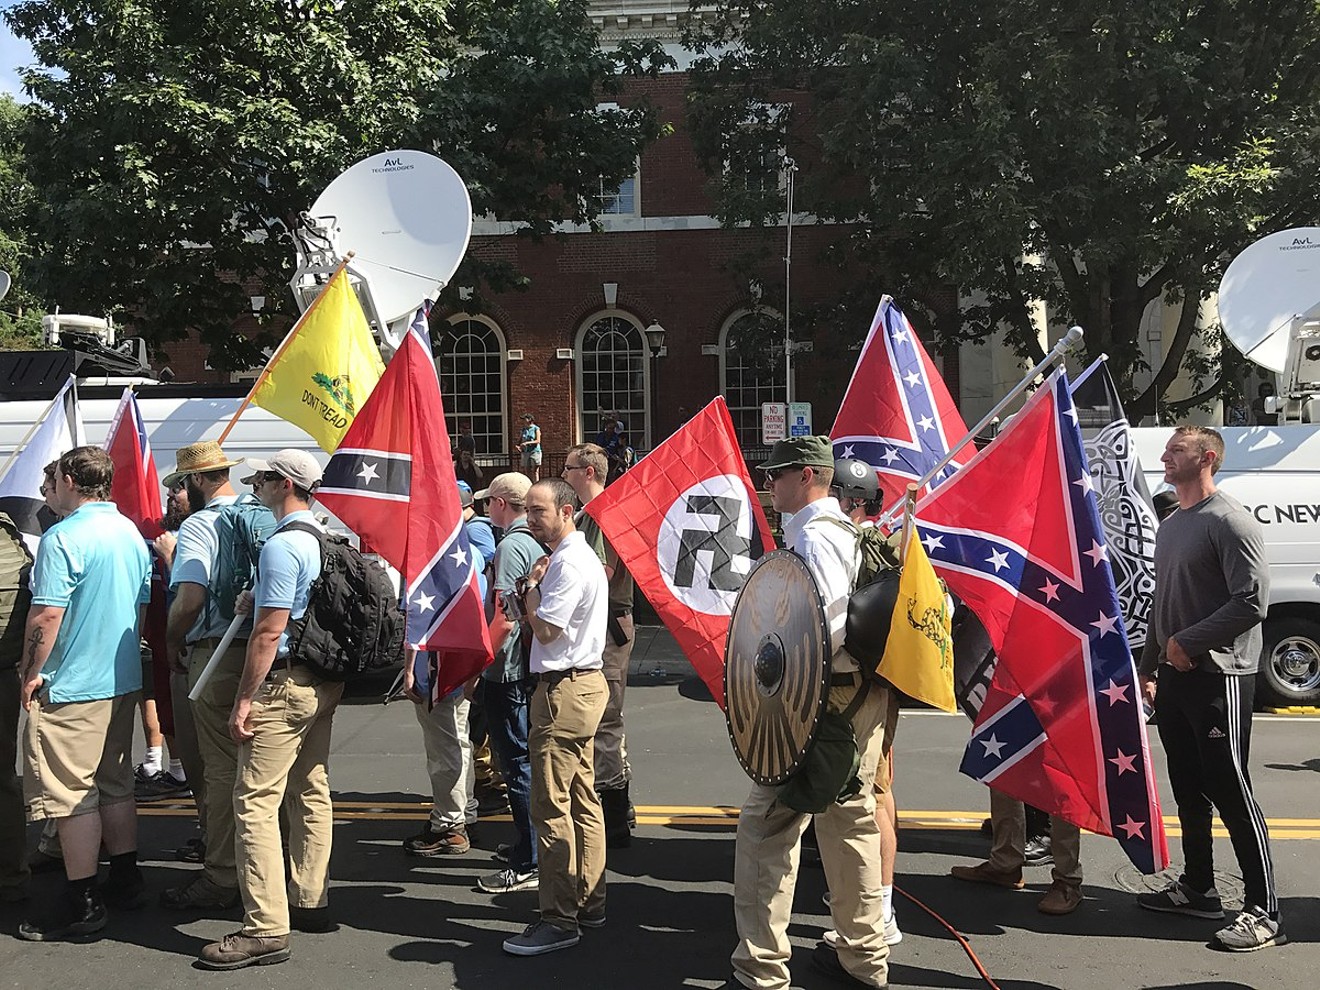 At the Unite the Right rally in Charlottesville August 12, 2017, alt-right members prepare to enter Emancipation Park holding Nazi, Confederate, and Gadsden "Don't Tread on Me" flags.